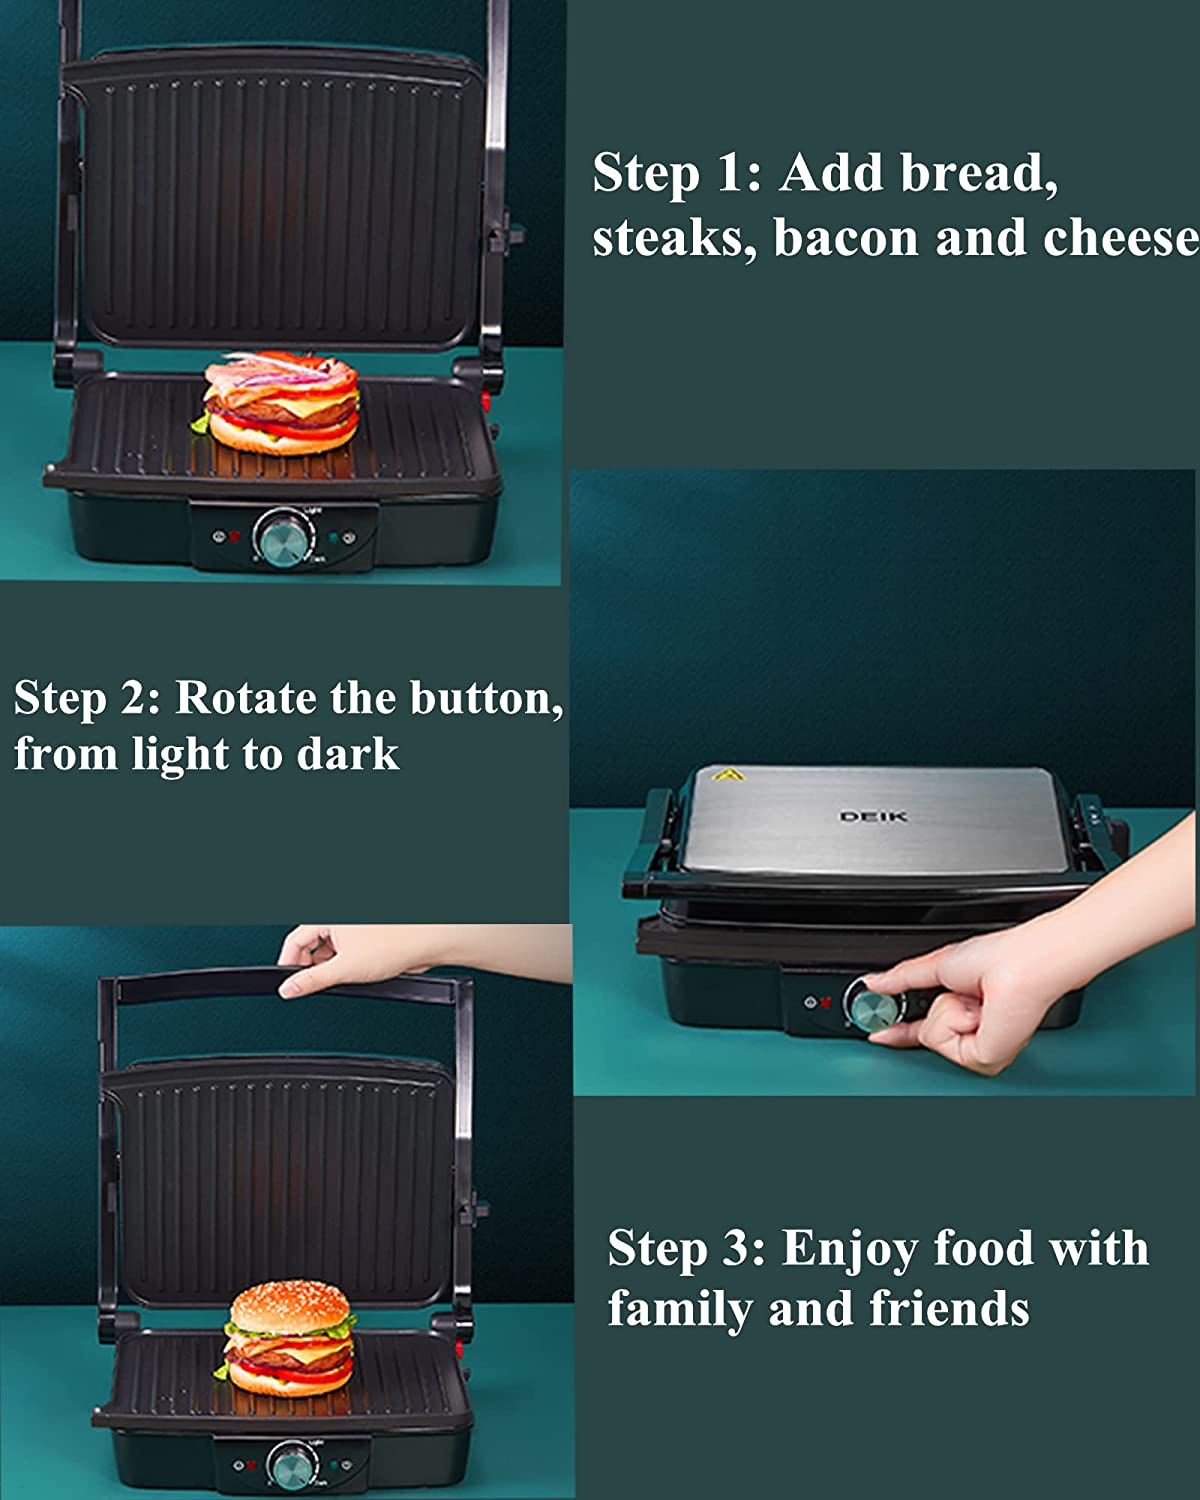 DEIK Electric Table Grill for Double-Sided 2000 W, Contact Grill 180 Degree Opening, Electric Grill for Panini, Toasts, Steak, Vegetables, Sandwich, Adjustable Temperature Controller